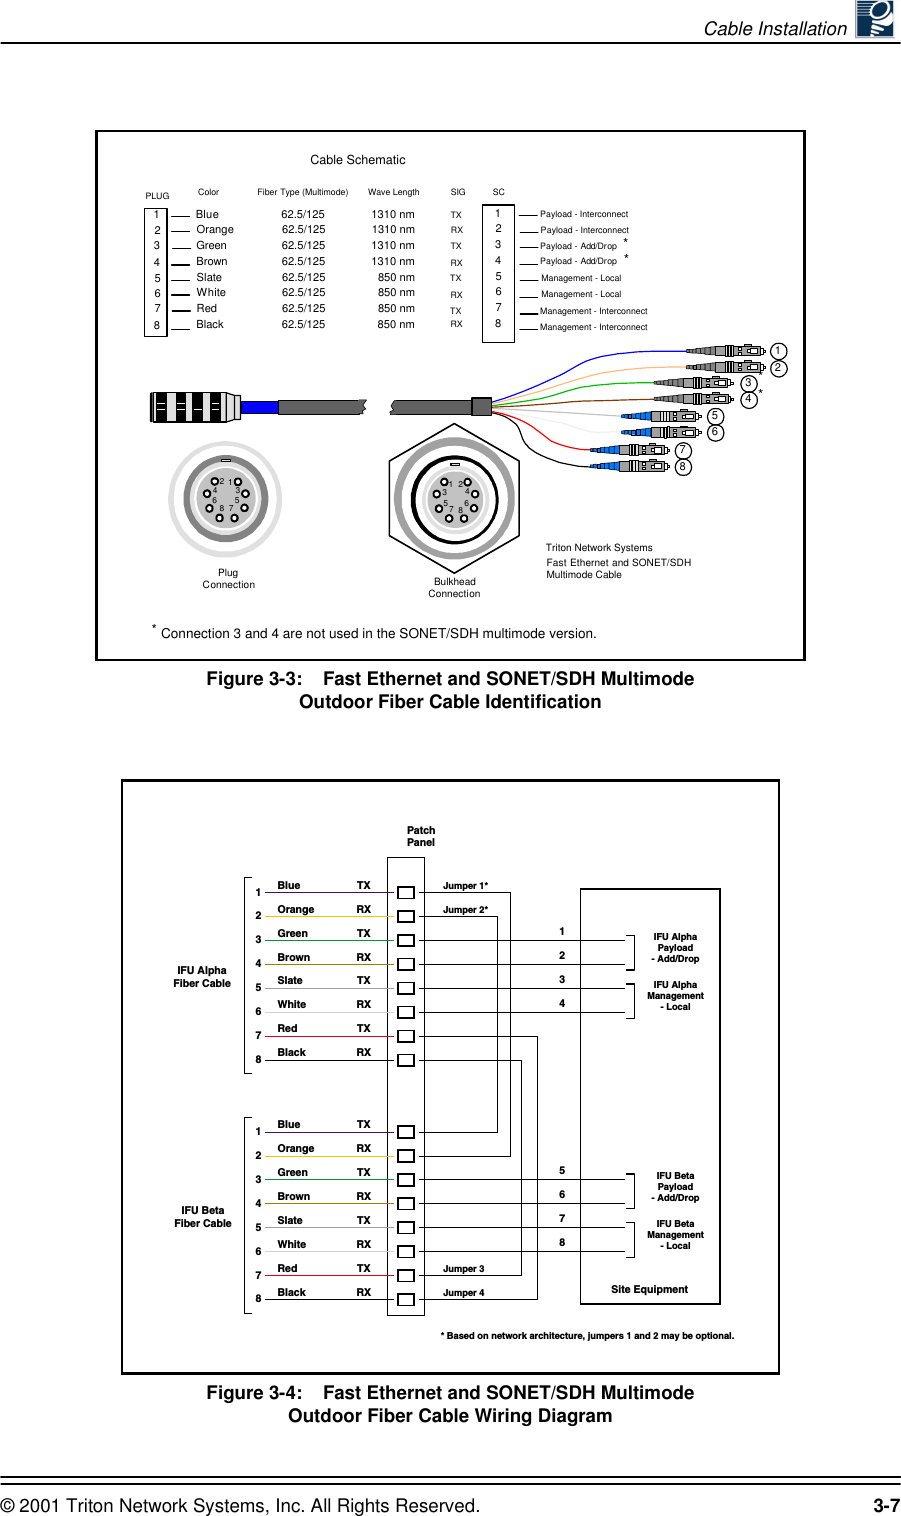 Cable Installation © 2001 Triton Network Systems, Inc. All Rights Reserved. 3-7Figure 3-3:    Fast Ethernet and SONET/SDH Multimode Outdoor Fiber Cable IdentificationFigure 3-4:    Fast Ethernet and SONET/SDH Multimode Outdoor Fiber Cable Wiring Diagram       PlugConnection   BulkheadConnectionCable SchematicTriton Network SystemsFast Ethernet and SONET/SDH Multimode CableBlue 62.5/125 1310 nm11Black 62.5/125   850 nm88Orange 62.5/125 1310 nm22Green 62.5/125 1310 nm33Brown 62.5/125 1310 nm44Slate 62.5/125   850 nm55White 62.5/125   850 nm66Red 62.5/125   850 nm77PLUG Color Fiber Type (Multimode) Wave Length SC12345678SIGTXTXTXTXRXRXRXRXPayload - InterconnectPayload - InterconnectPayload - Add/DropPayload - Add/DropManagement - LocalManagement - LocalManagement - InterconnectManagement - Interconnect1243657812345687*****Connection 3 and 4 are not used in the SONET/SDH multimode version.PatchPanelIFU AlphaFiber CableIFU BetaFiber Cable123456781234561234567878IFU AlphaPayload- Add/DropIFU AlphaManagement- LocalIFU BetaPayload- Add/DropIFU BetaManagement- LocalSite EquipmentJumper 1*Jumper 2*Jumper 3Jumper 4BlueOrangeGreenBrownSlateWhiteRedBlackBlueOrangeGreenBrownSlateWhiteRedBlackTXRXTXRXTXRXTXRXTXRXTXRXTXRXTXRX* Based on network architecture, jumpers 1 and 2 may be optional.